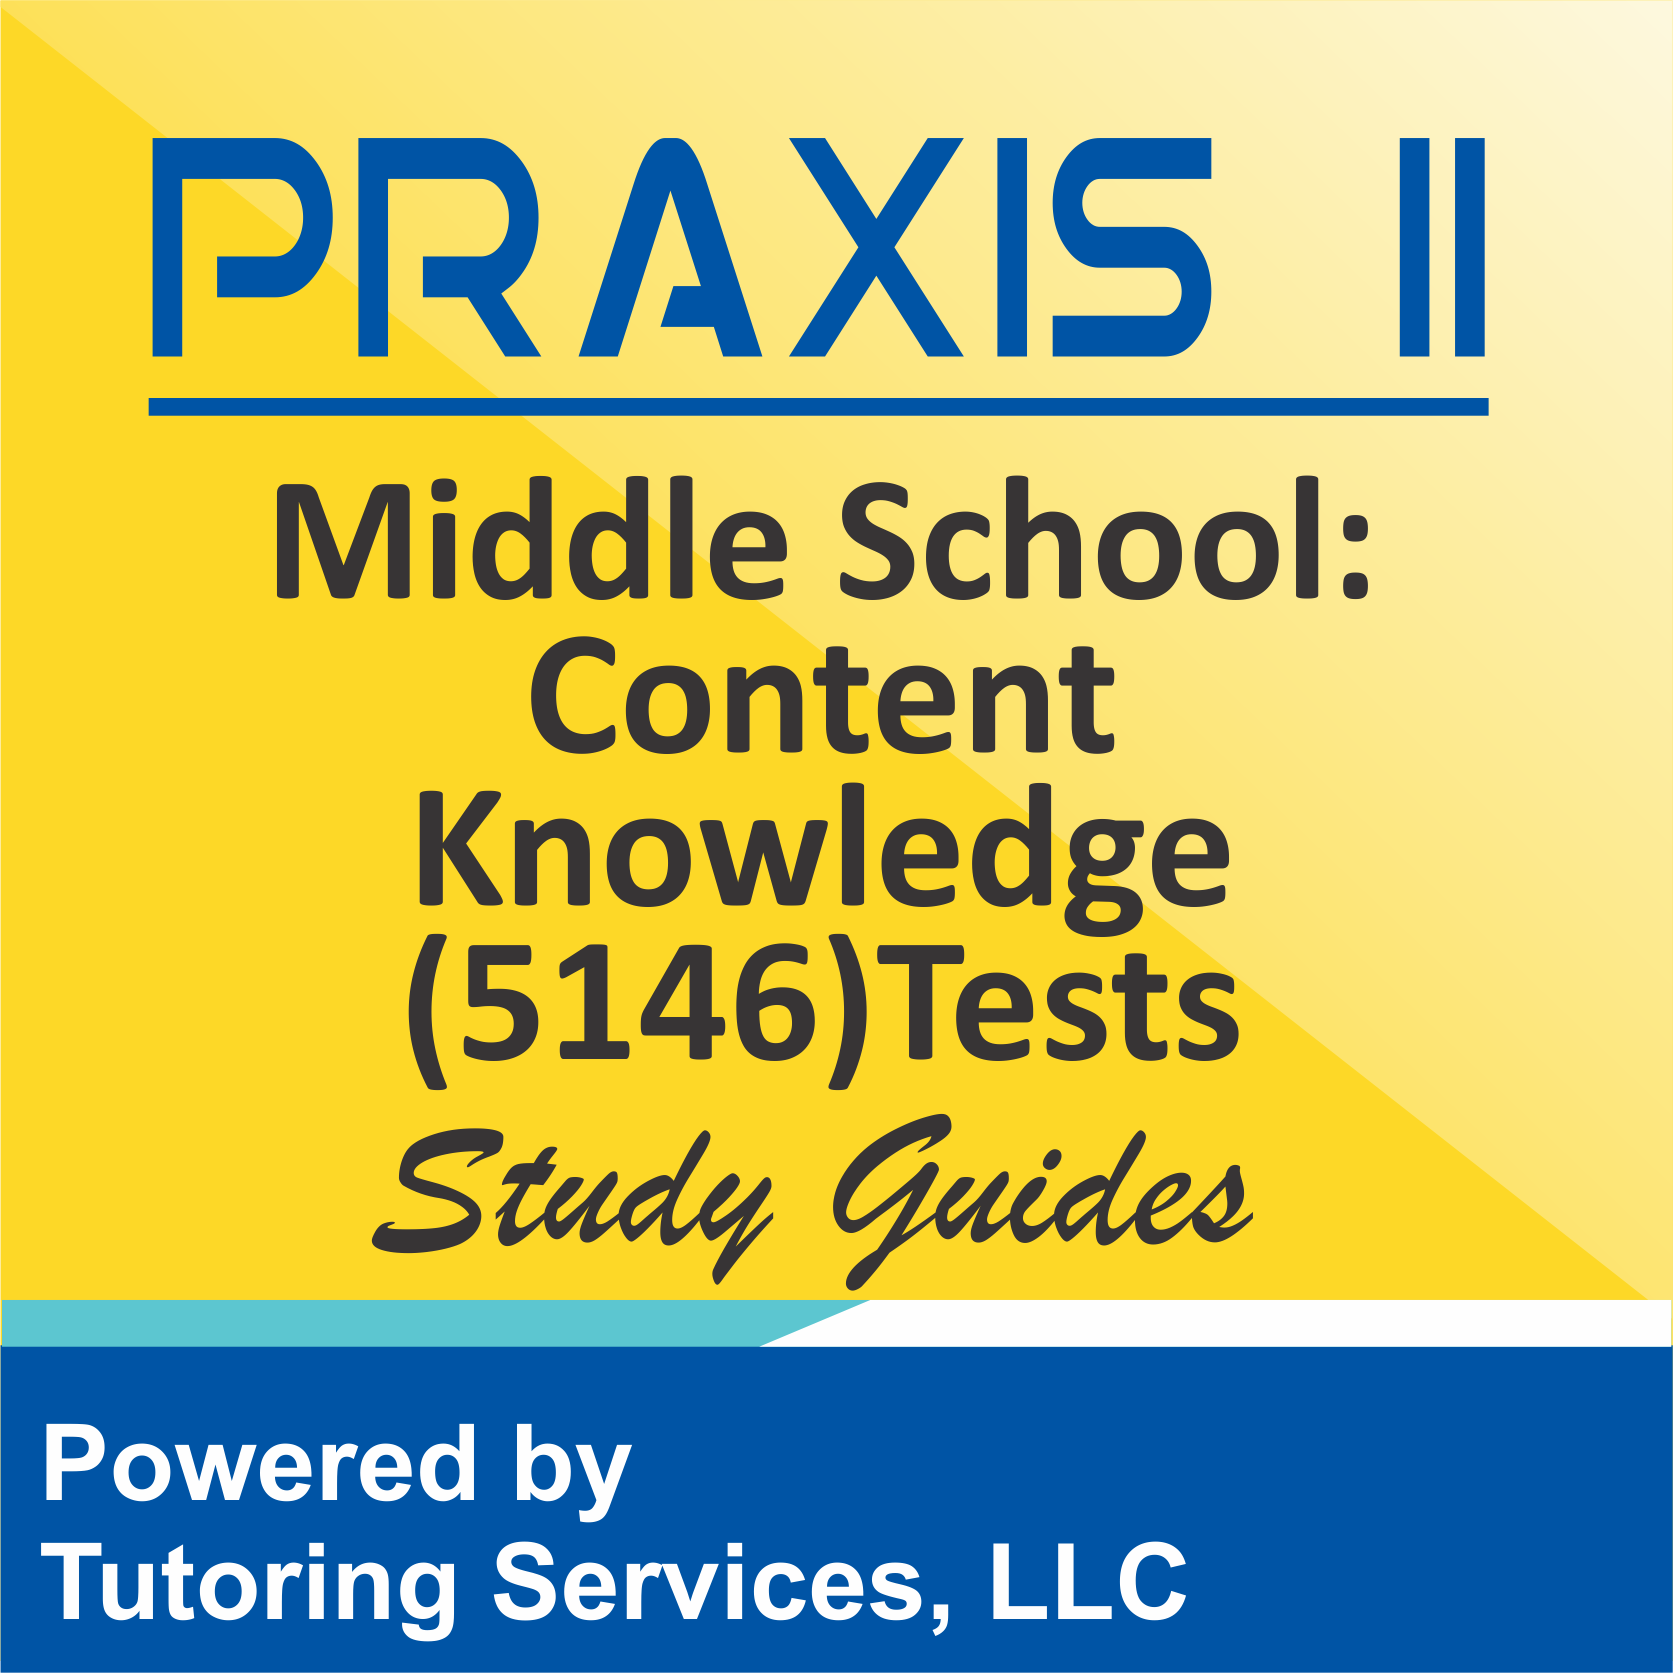 Praxis II Middle School: Content Knowledge (5146) Examination Information